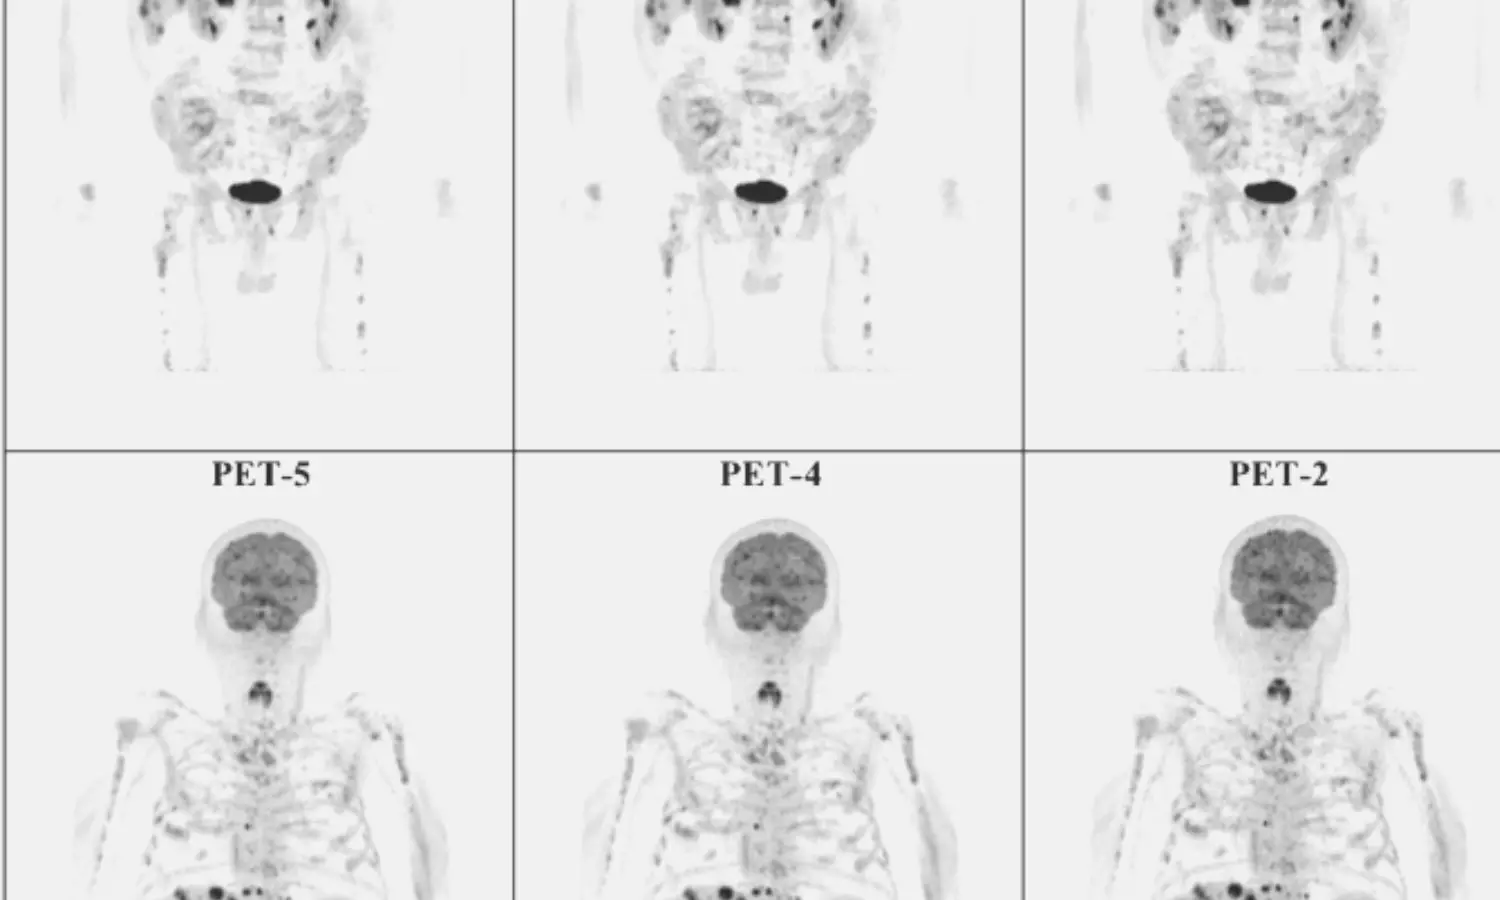 Whole-body PET/CT reduces scan time patients with melanoma: Study